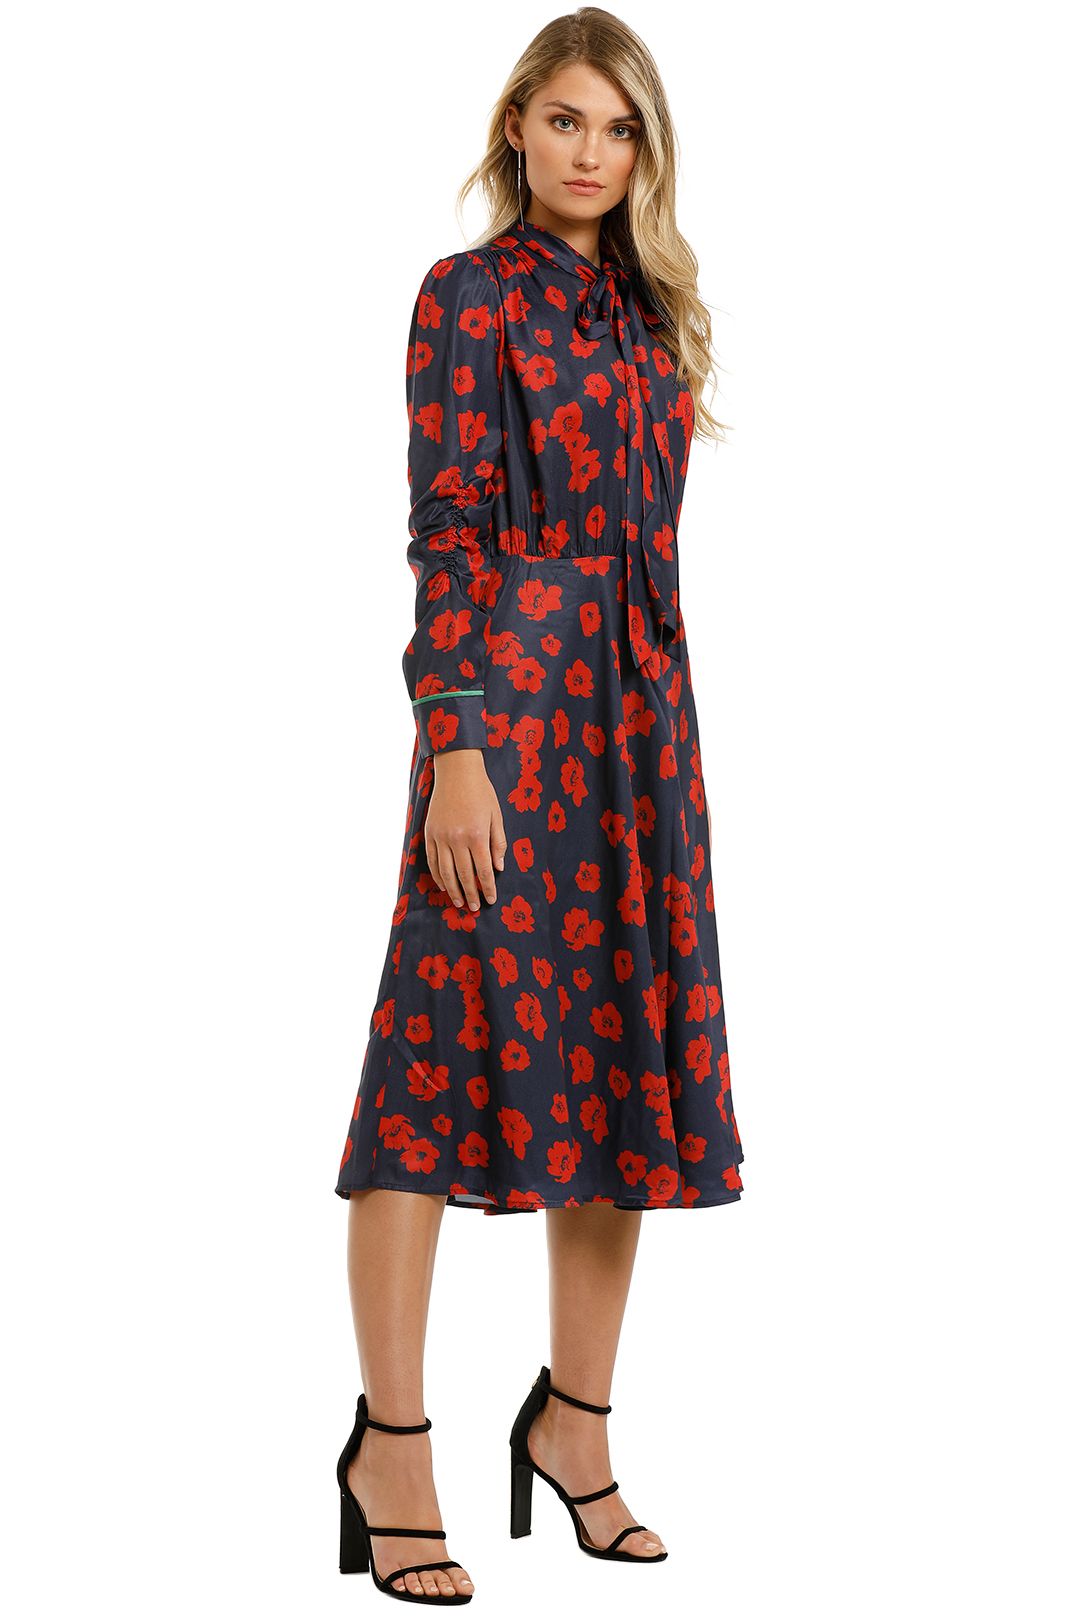 Grace-Willow-River-Dress-Red-Poppy-Print-Side